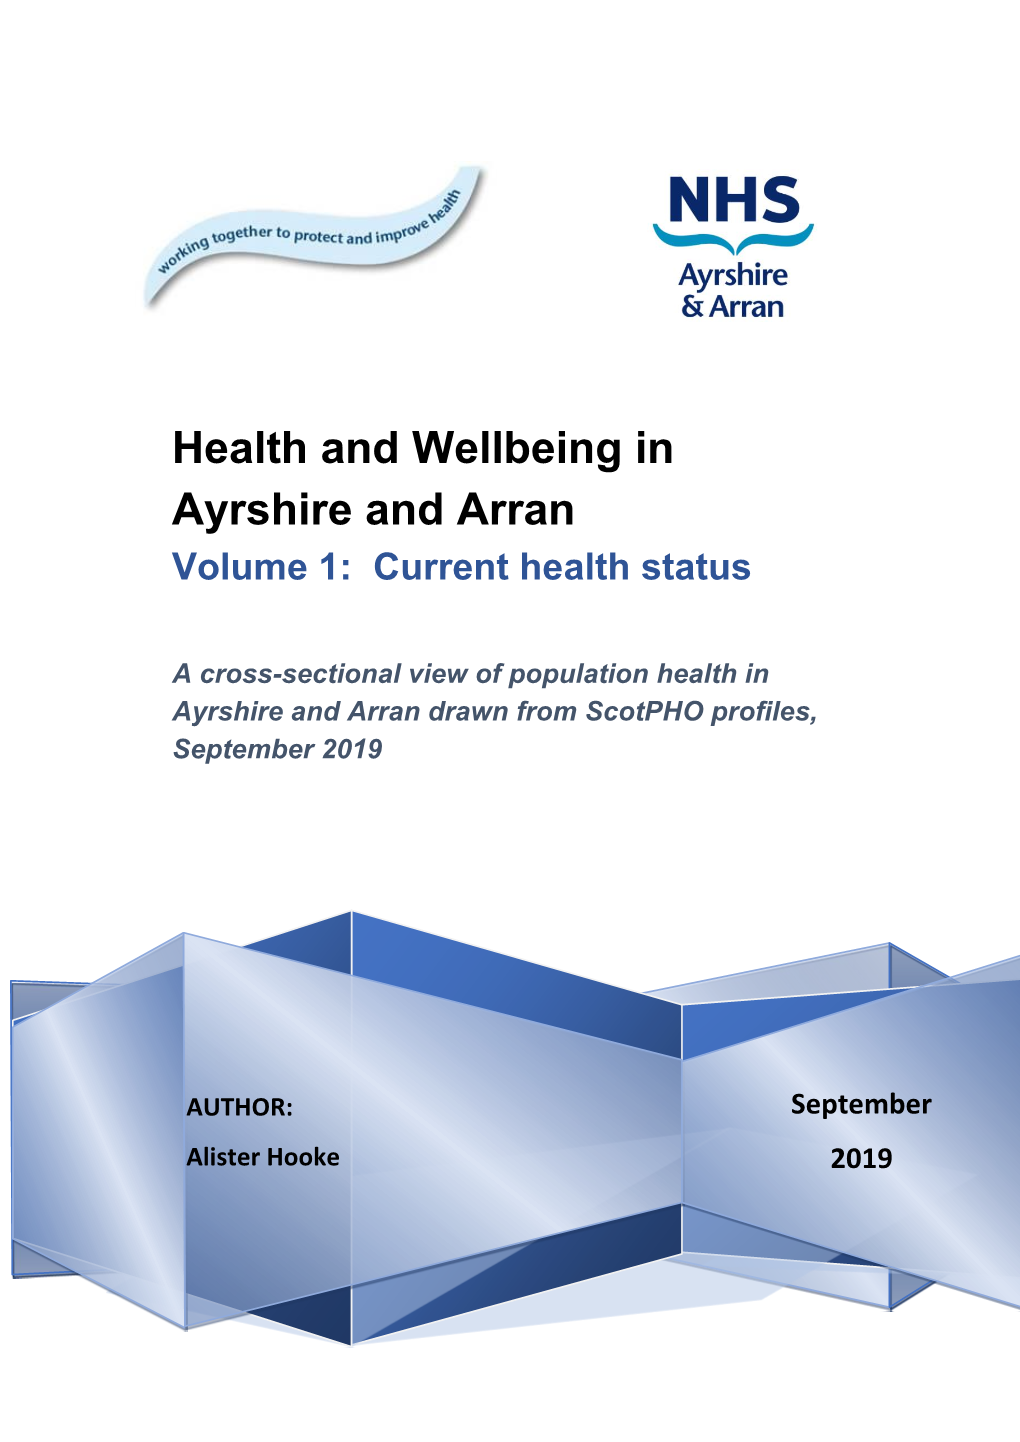 Health and Wellbeing in Ayrshire and Arran Volume 1: Current Health Status